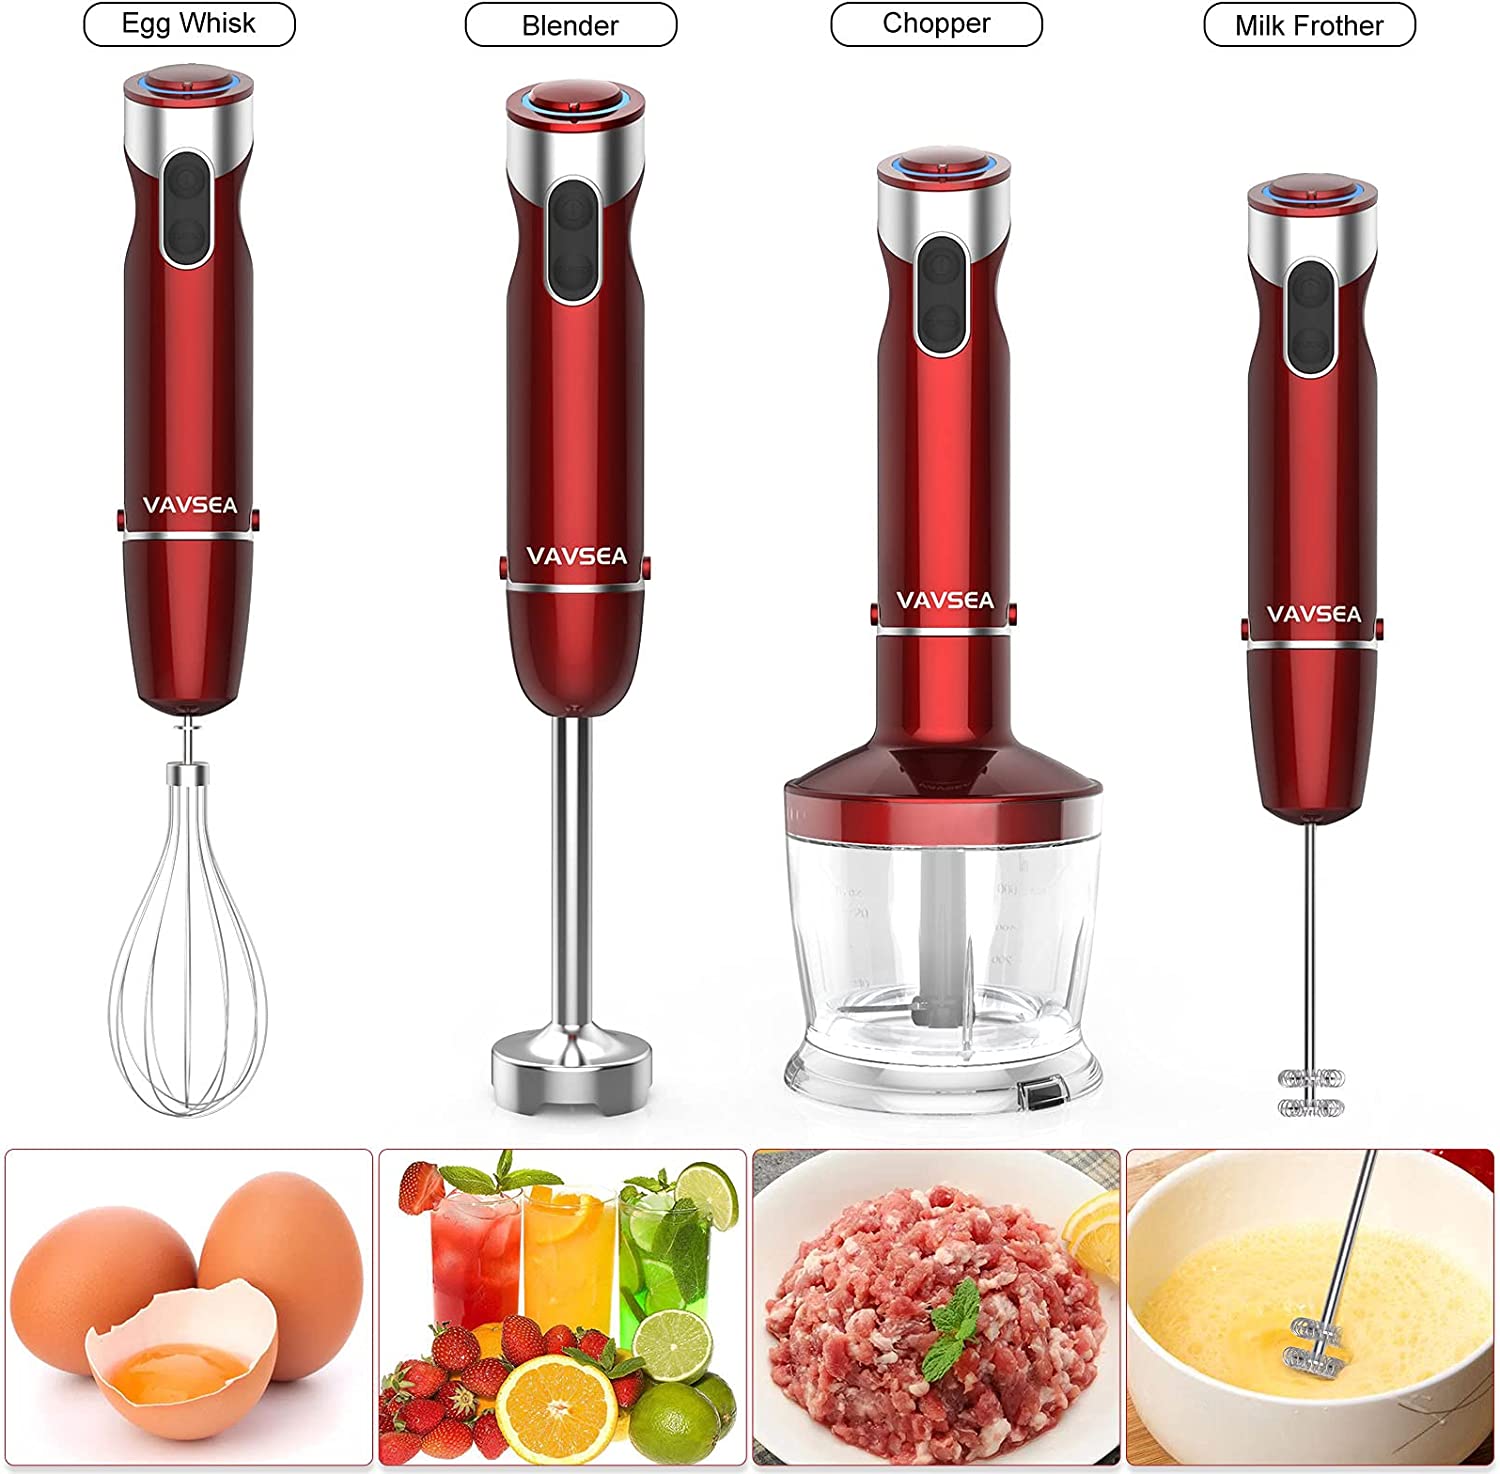 VAVSEA 1000W 5-in-1 Immersion hand Blender, 12 Speed Stick Blender with  Mixing Beaker (22oz) 304 Stainless Steel with Chopper Bowl, Milk Frother,  Egg